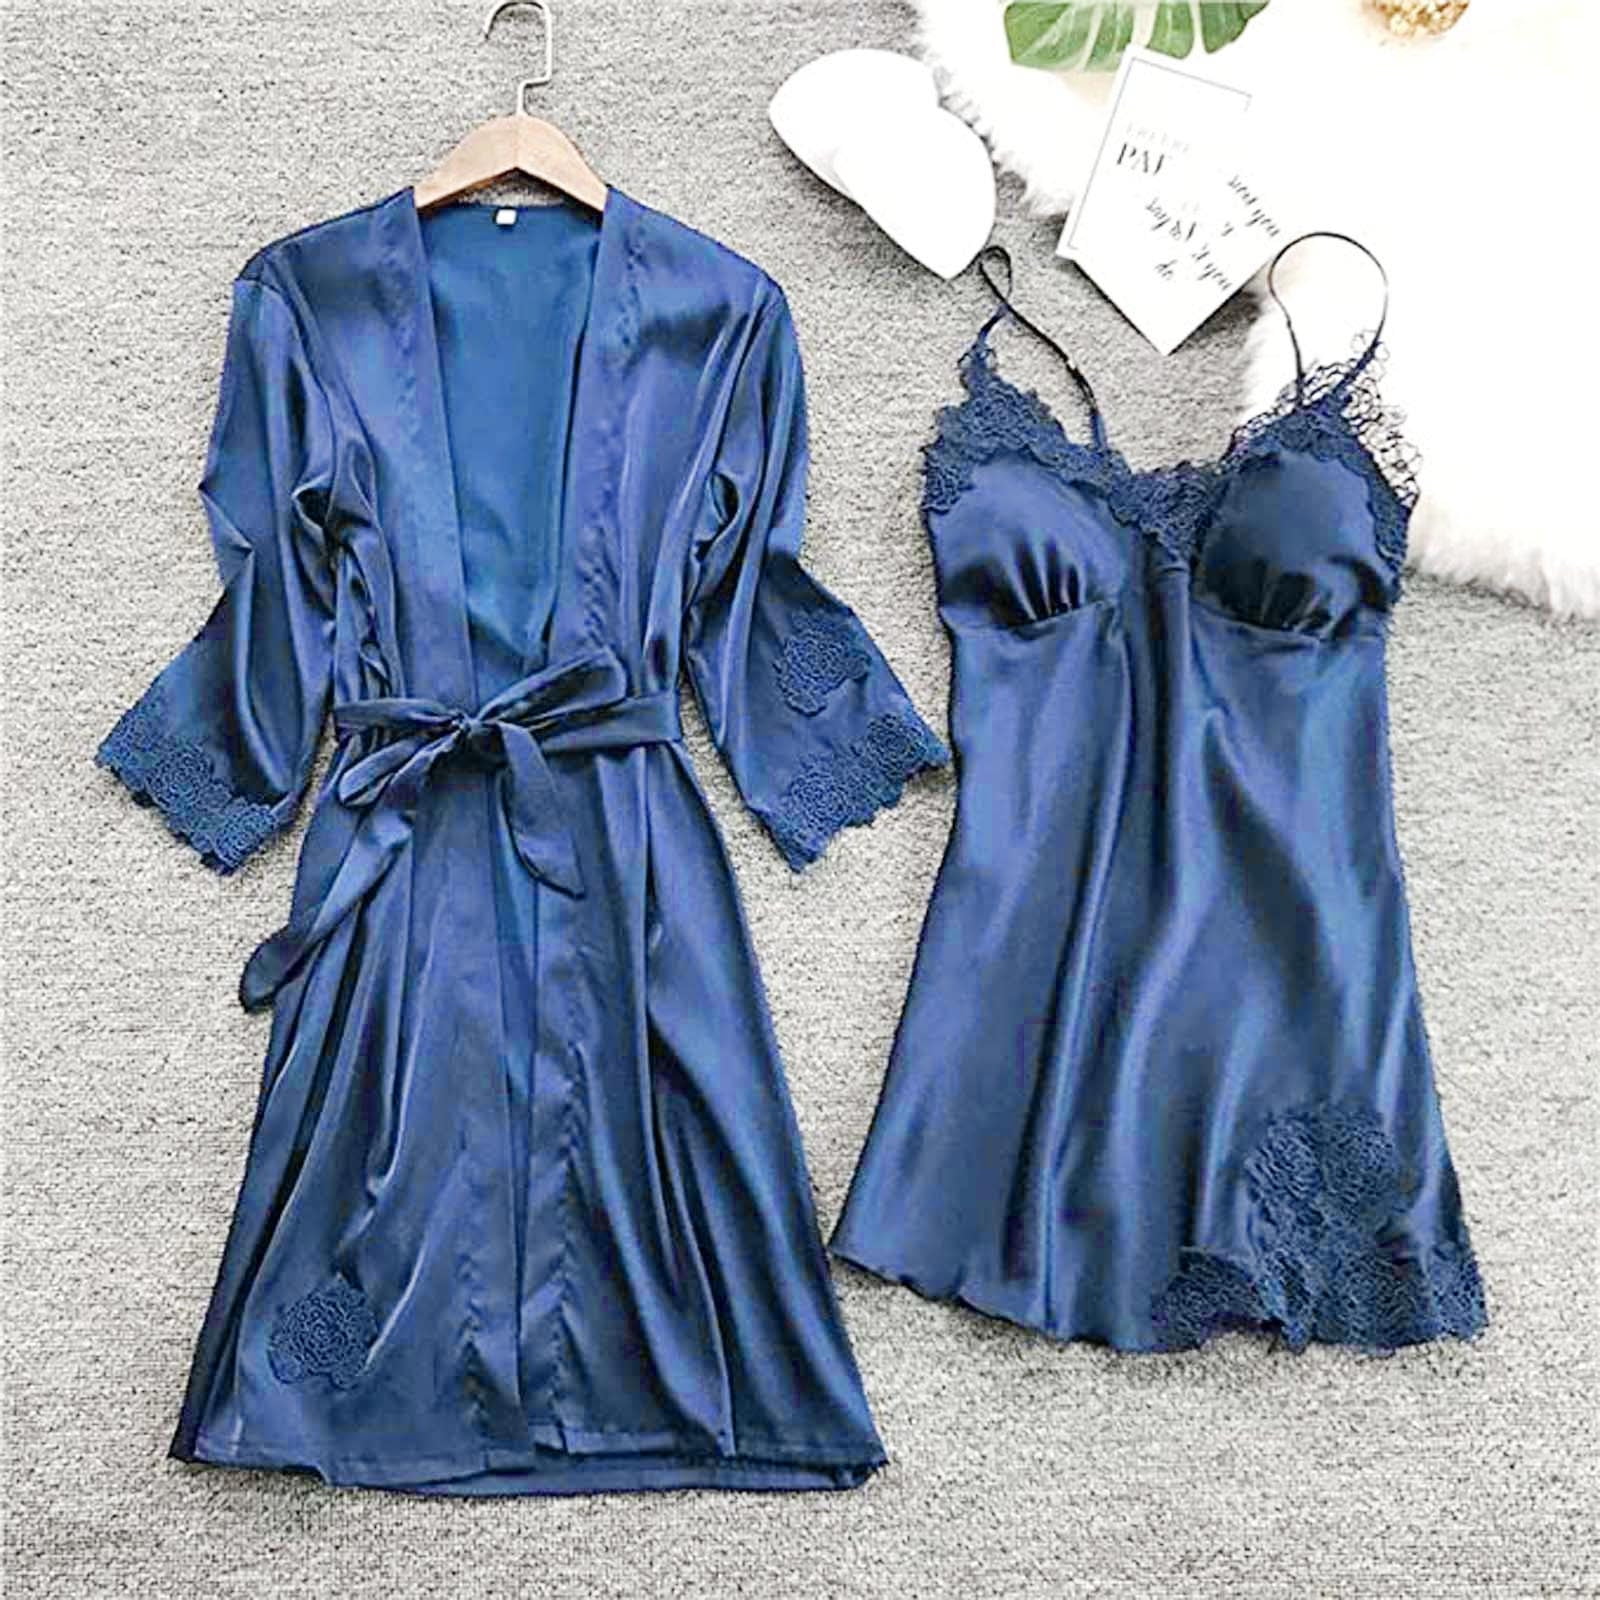 Women's Satin Robe Set 2 Piece Sexy Pajamas Sets Lace Cami Nightgown and  Silk Robes Nightwear 